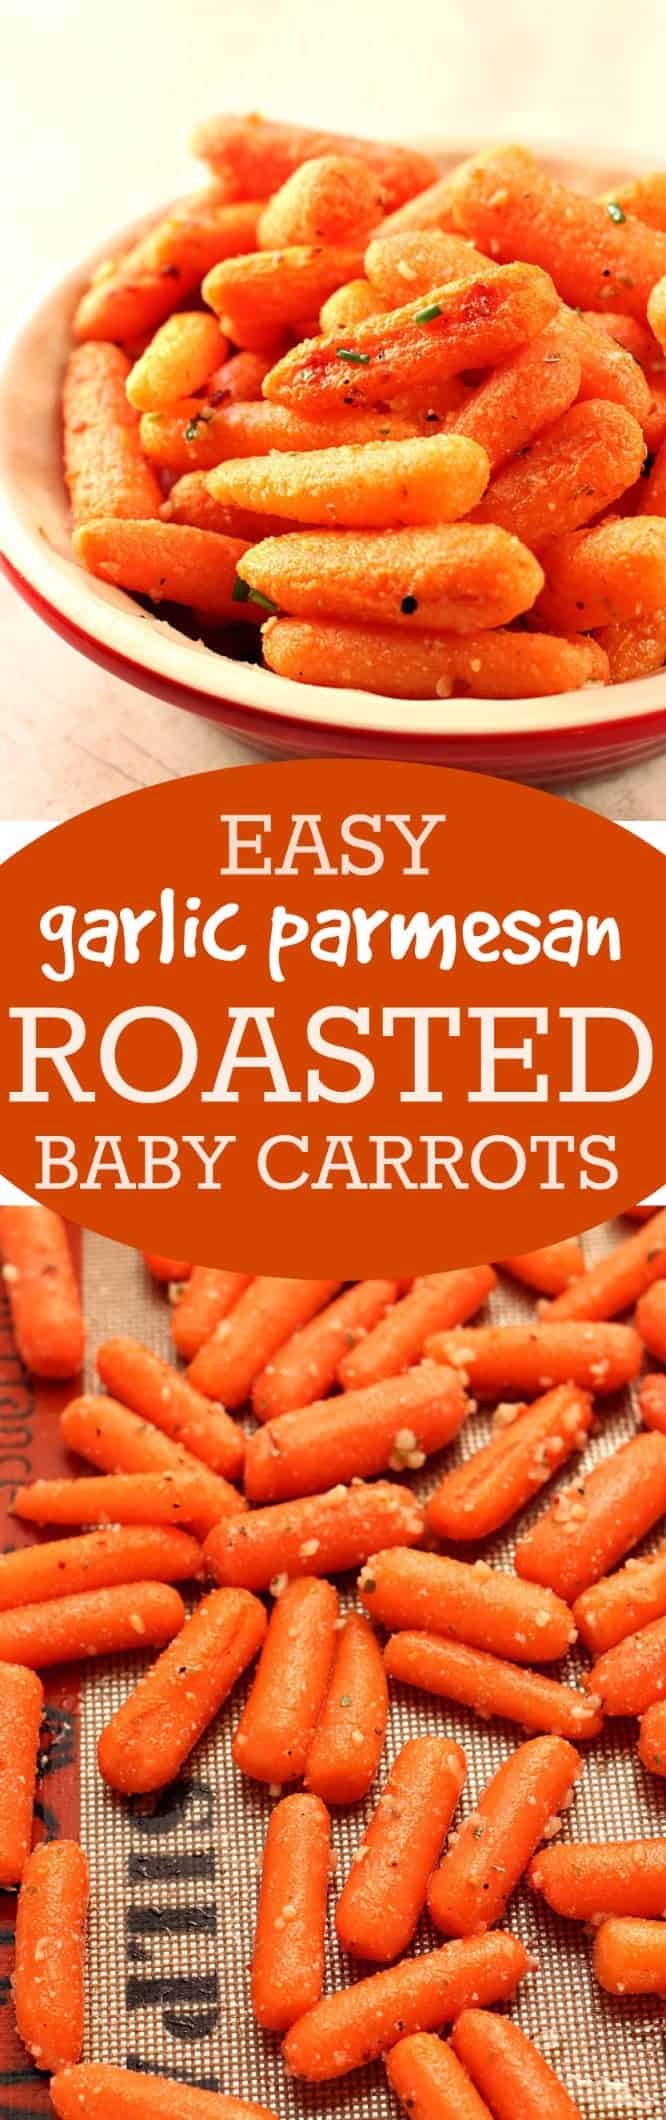 Easy Garlic Parmesan Roasted Baby Carrots - roasting carrots brings out their sweetness and rich flavor! Adding garlic, Parmesan and oregano makes them irresistible! 